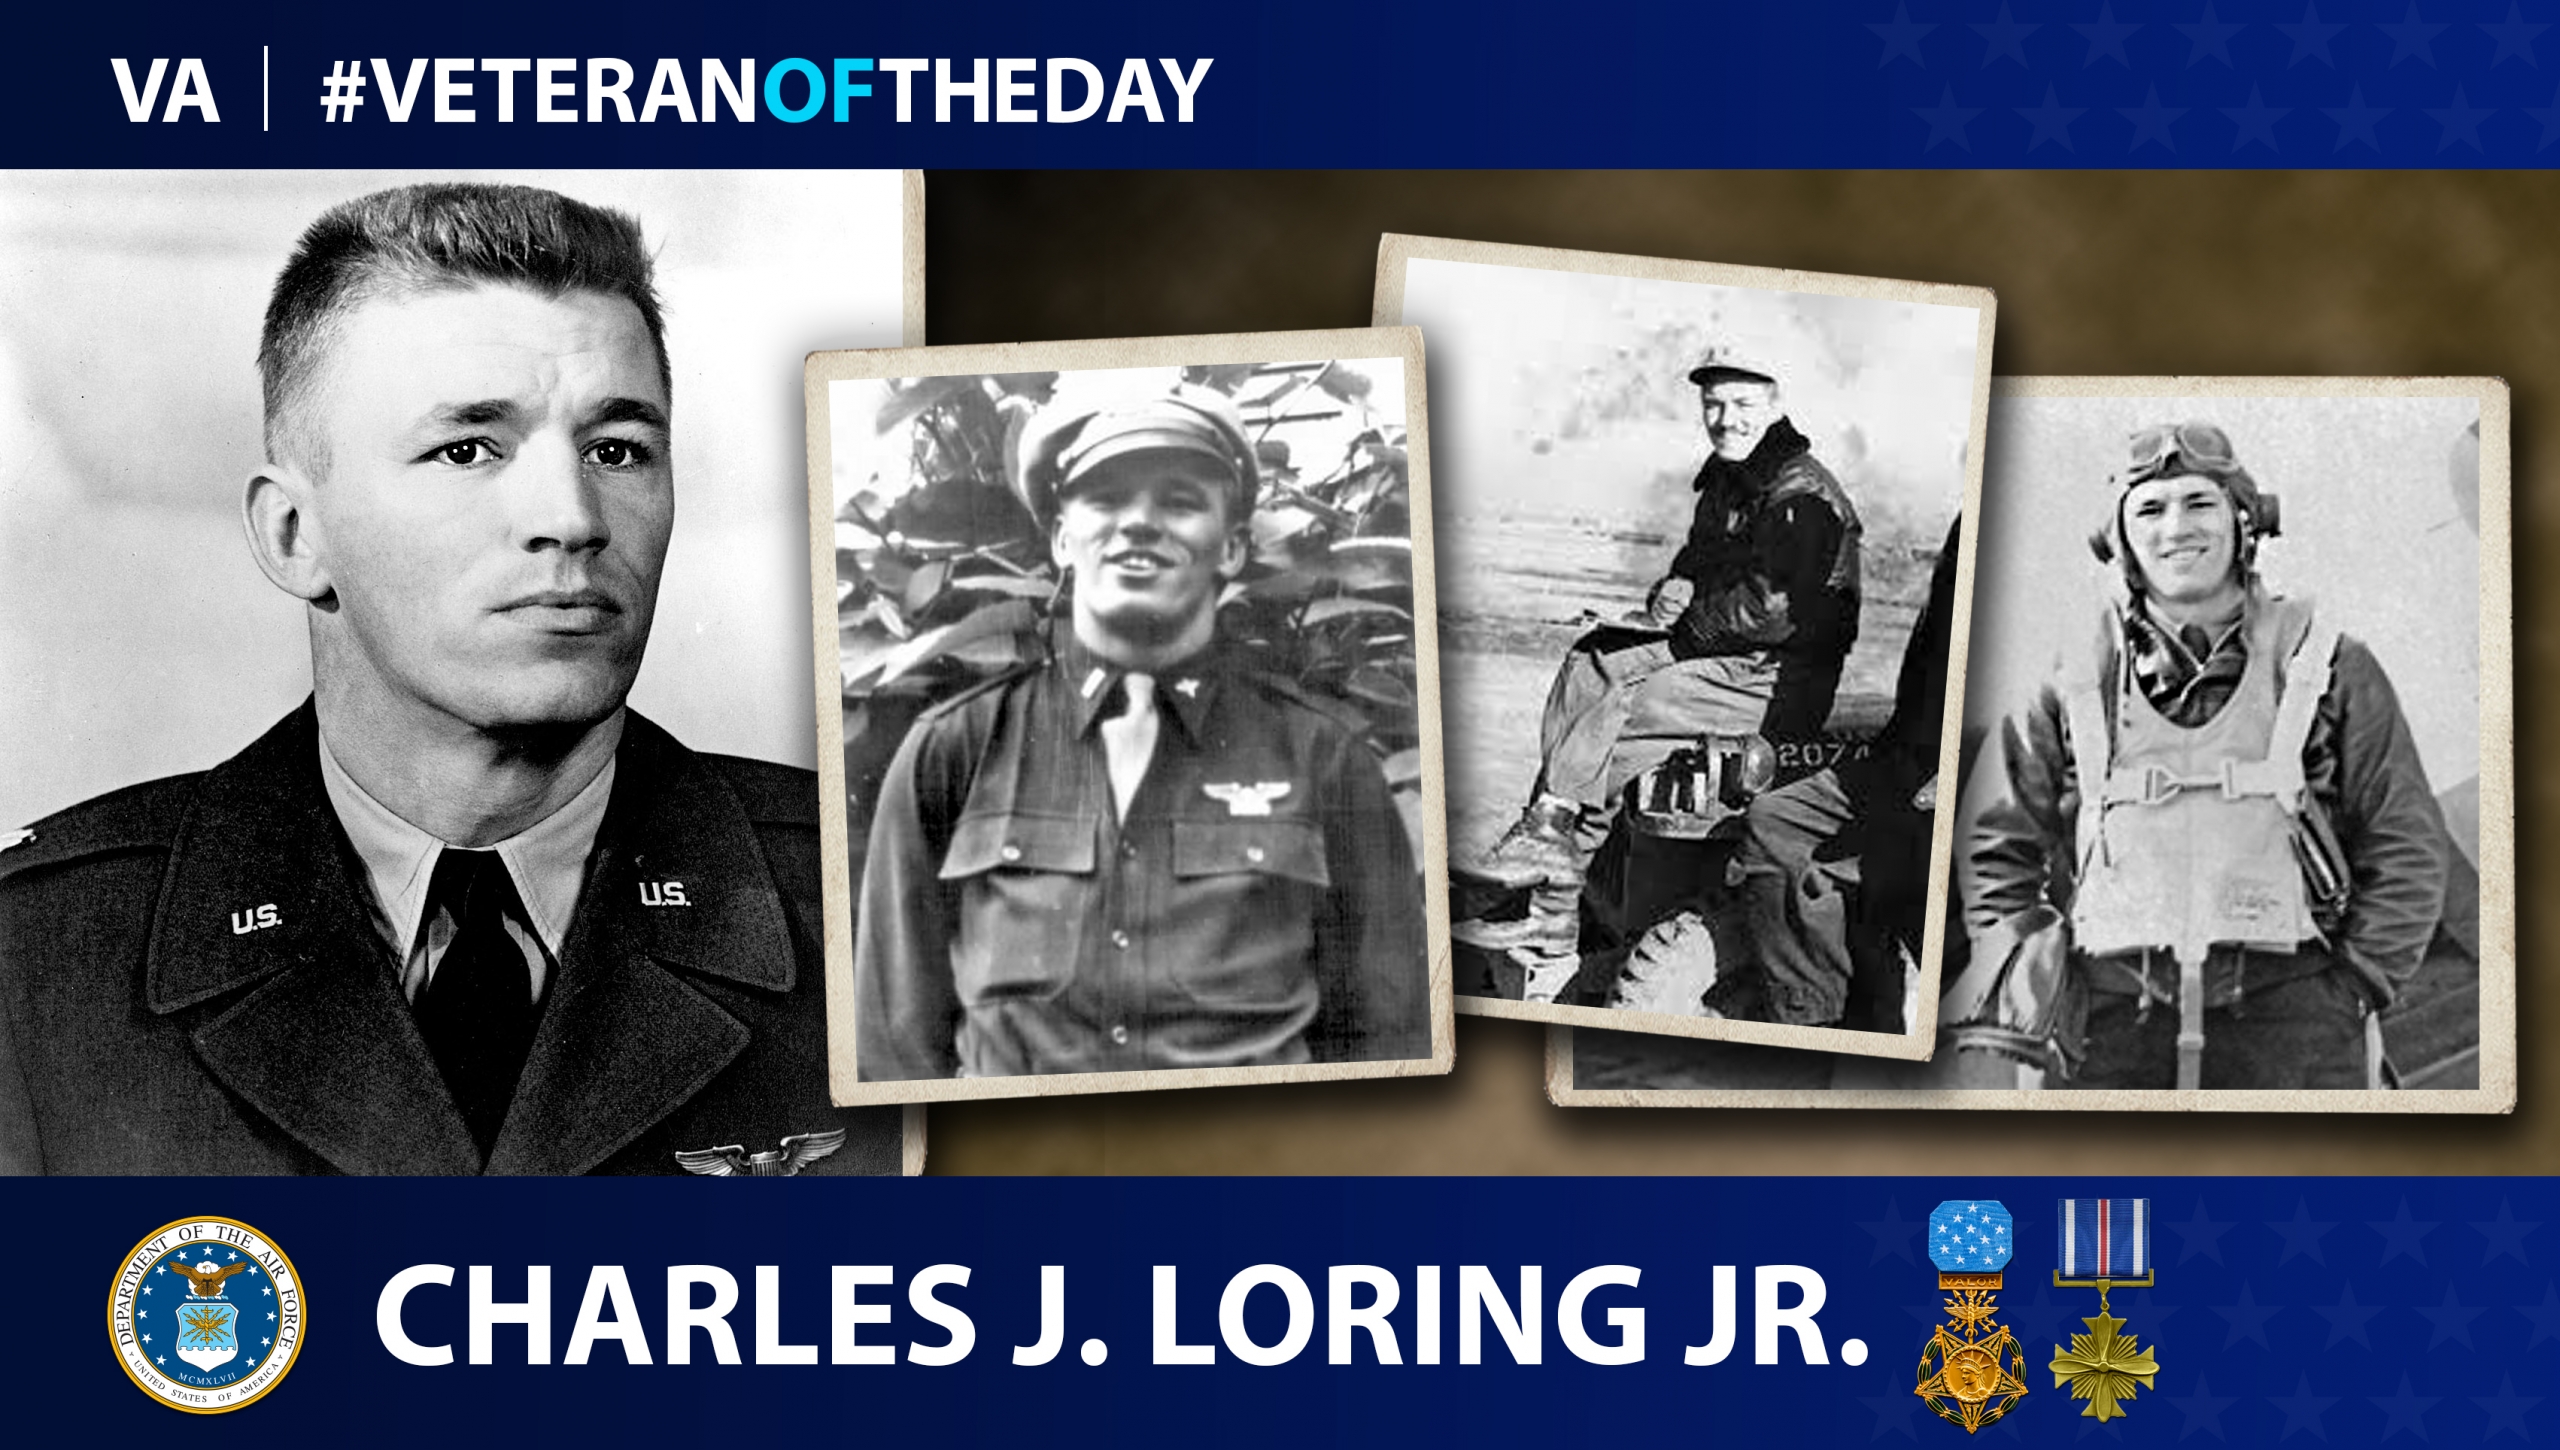 U.S. Army Air Forces Veteran Charles J. Loring Jr. is today’s Veteran of the Day.